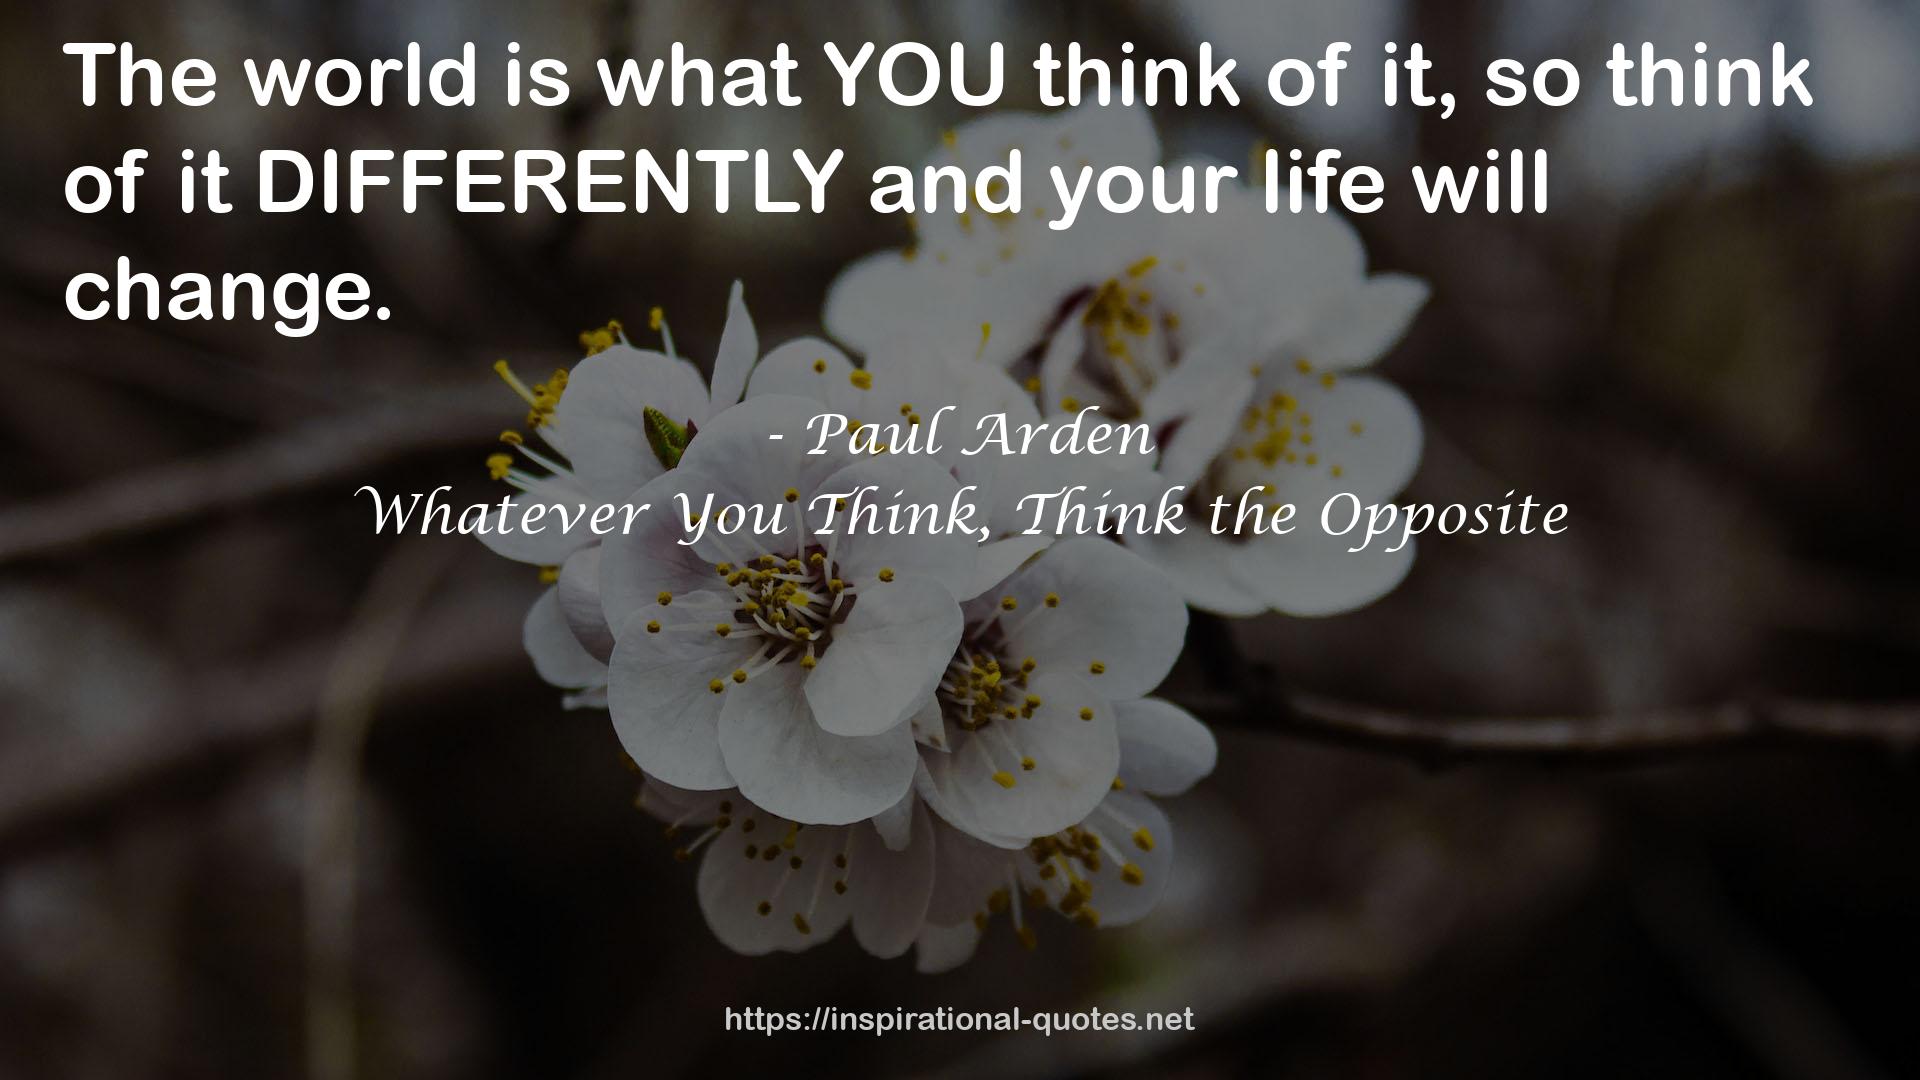 Whatever You Think, Think the Opposite QUOTES